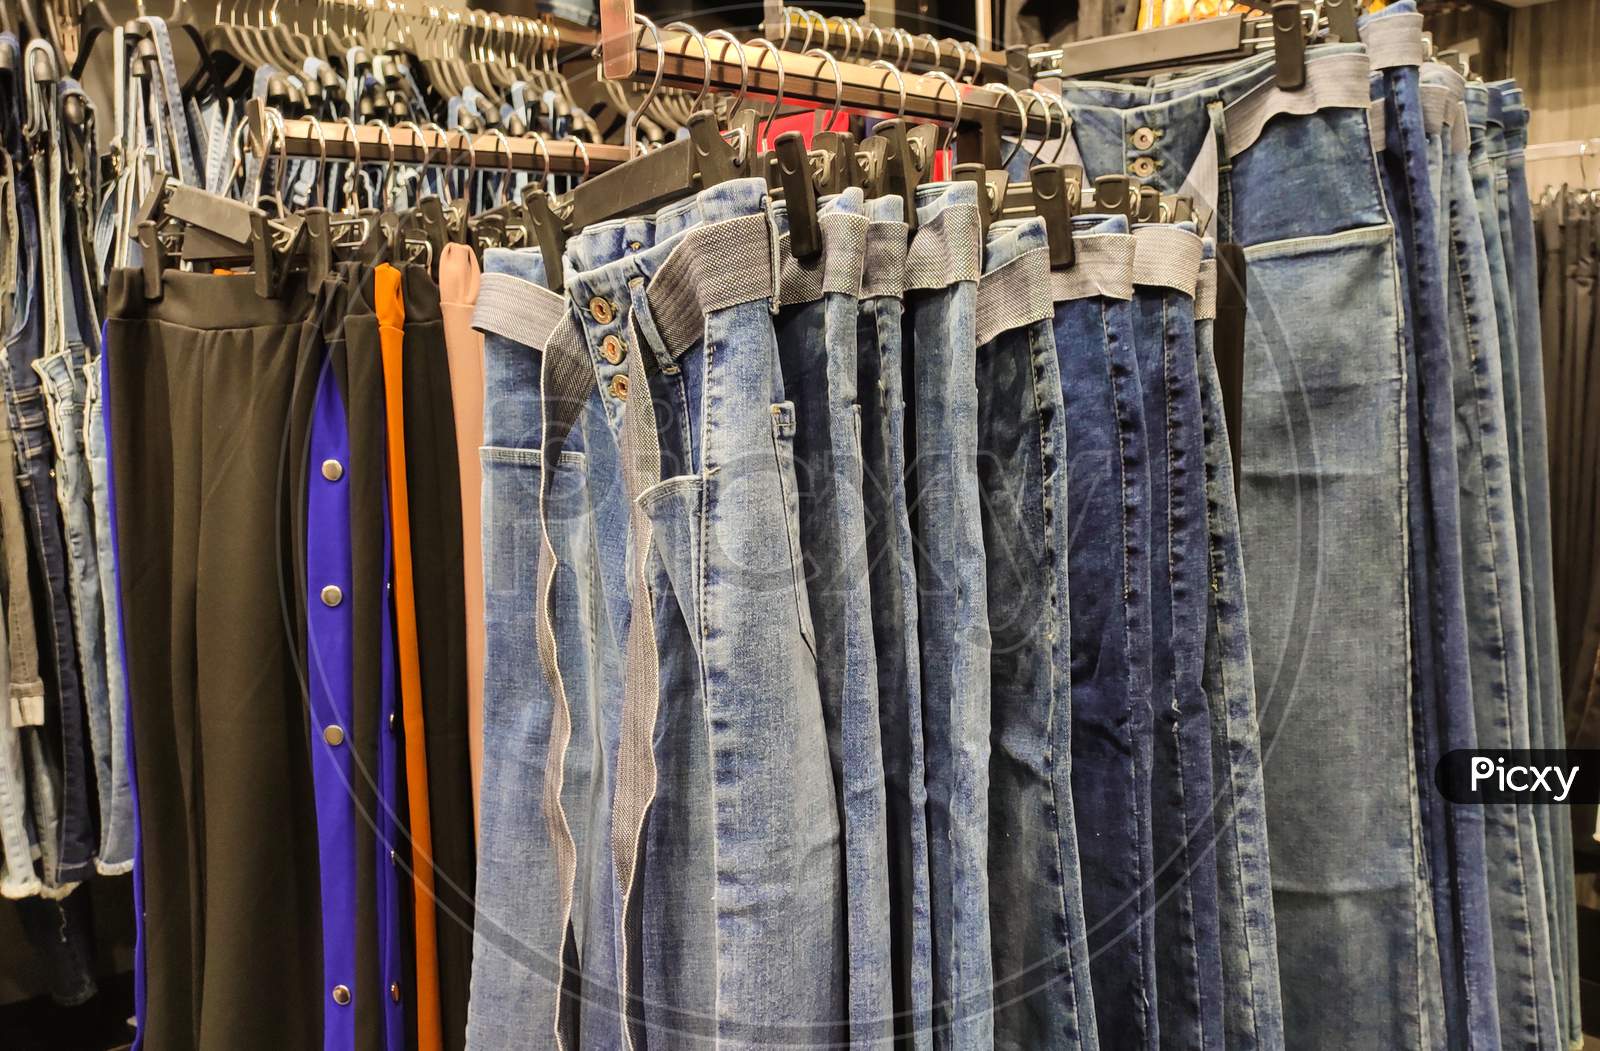 Blue Denim Made Of Jeans Hanging On Hangers In A Row Inside A Clothing Store Ready To Be Sold. Making An Abstract Pattern.